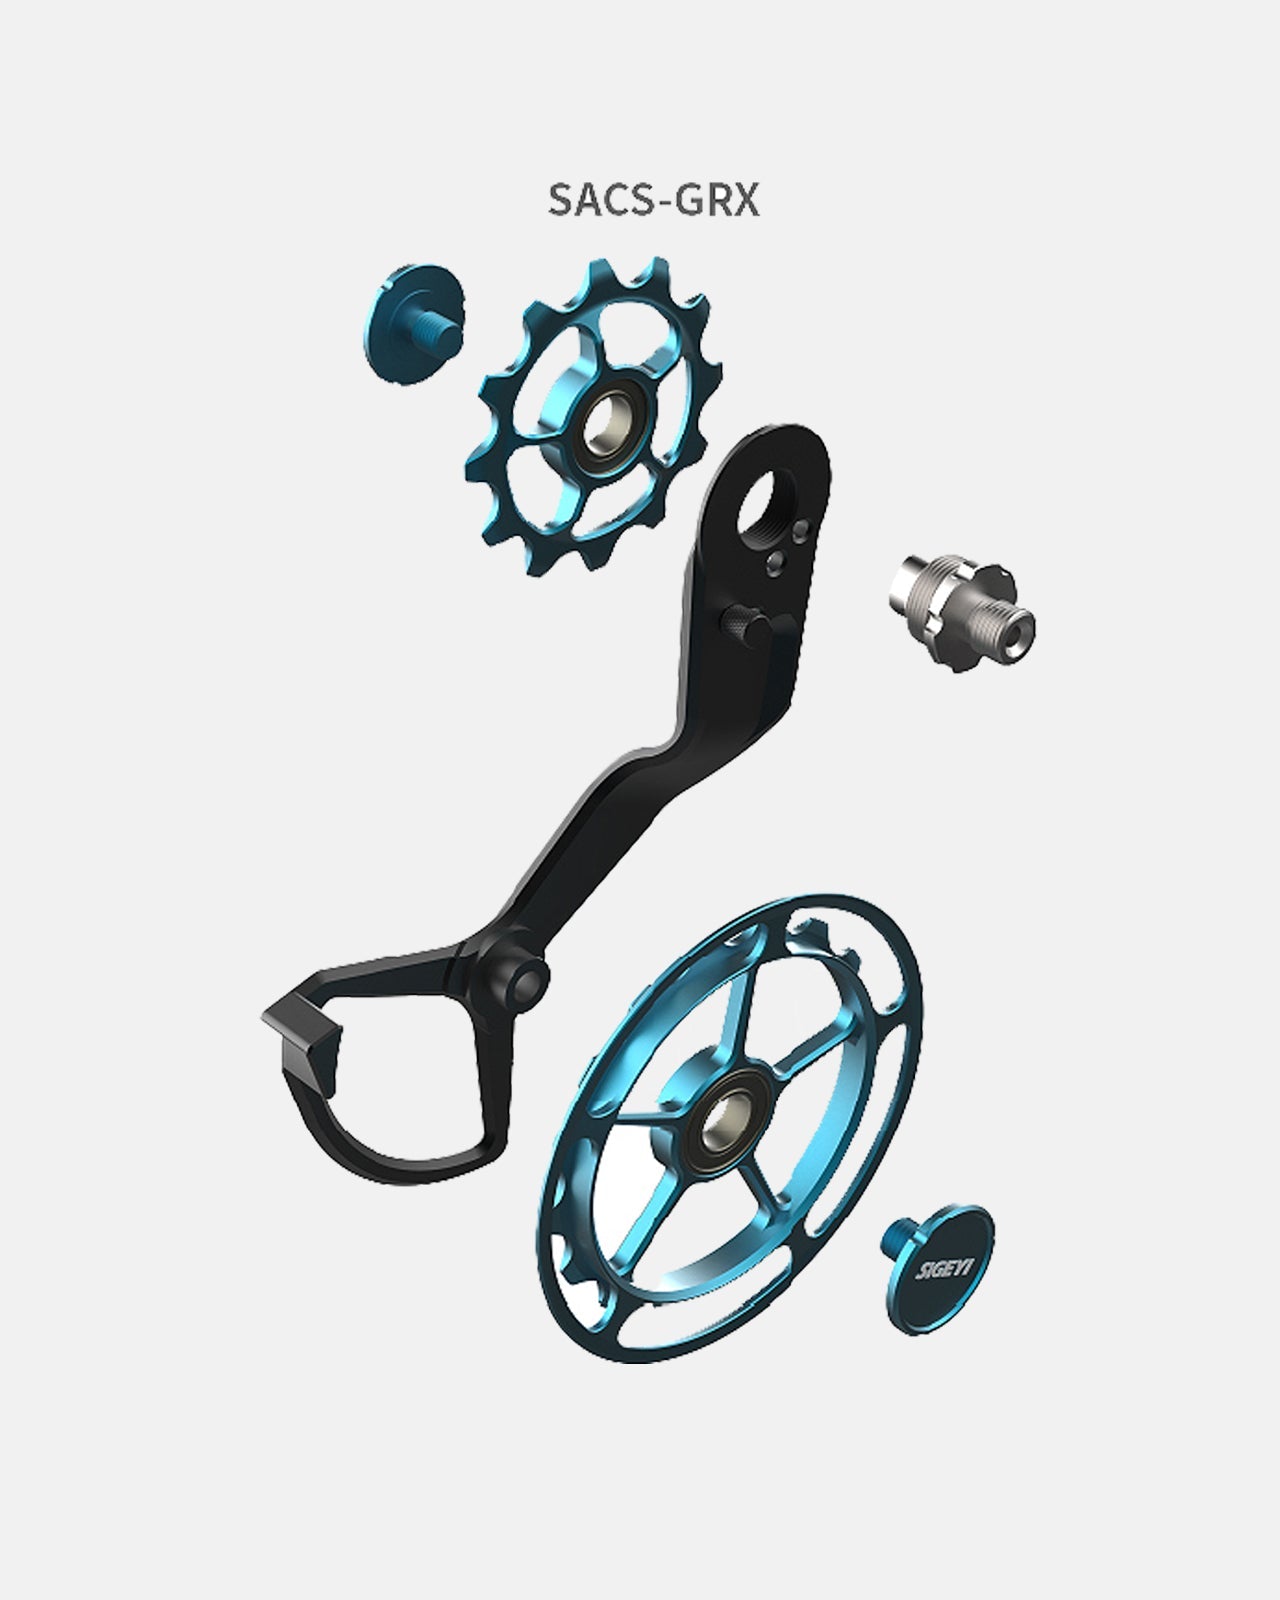 SIGEYI &quot;SACS&quot; Single Arm Cage System - GRX